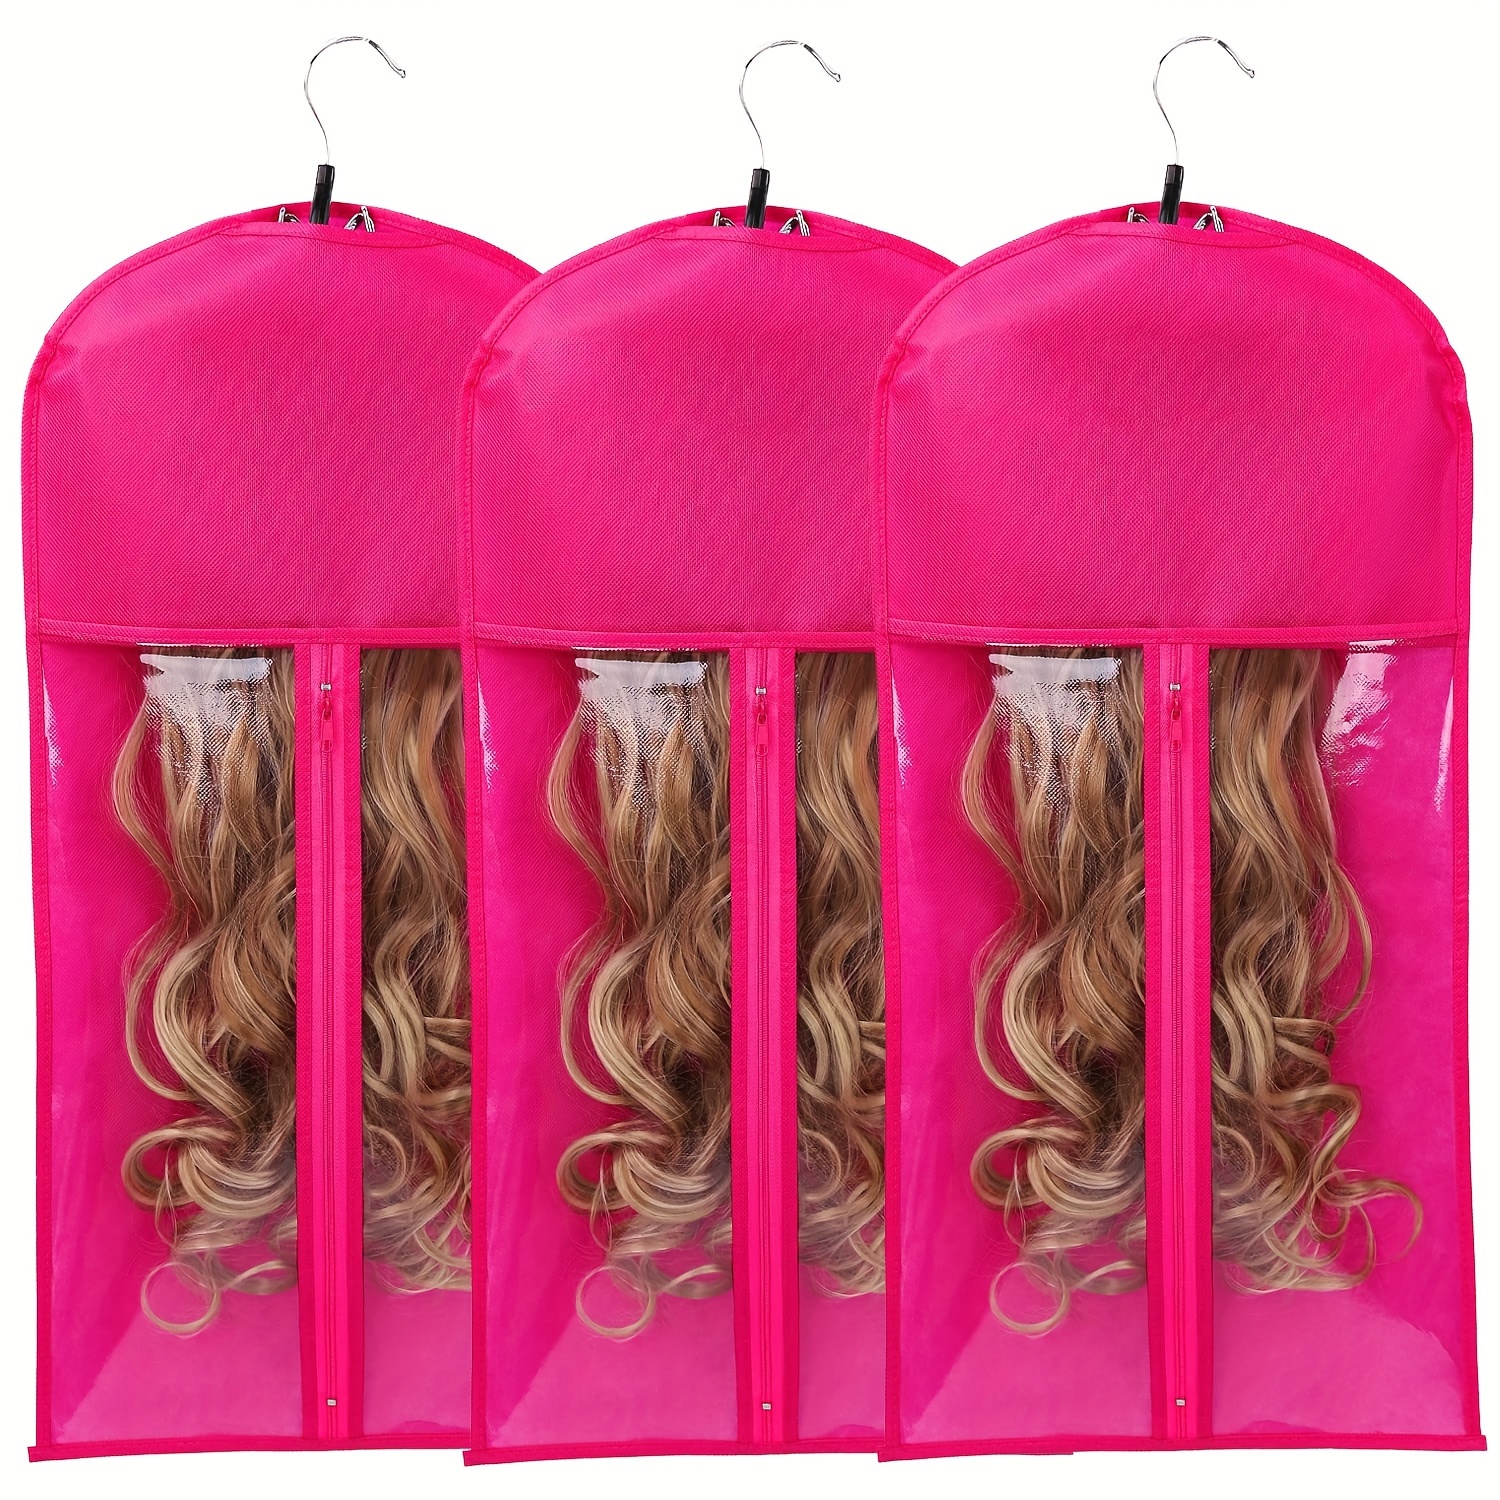 FOSHIO Hair Extension Hanger Holder Stand Styling Tools Hair Extension